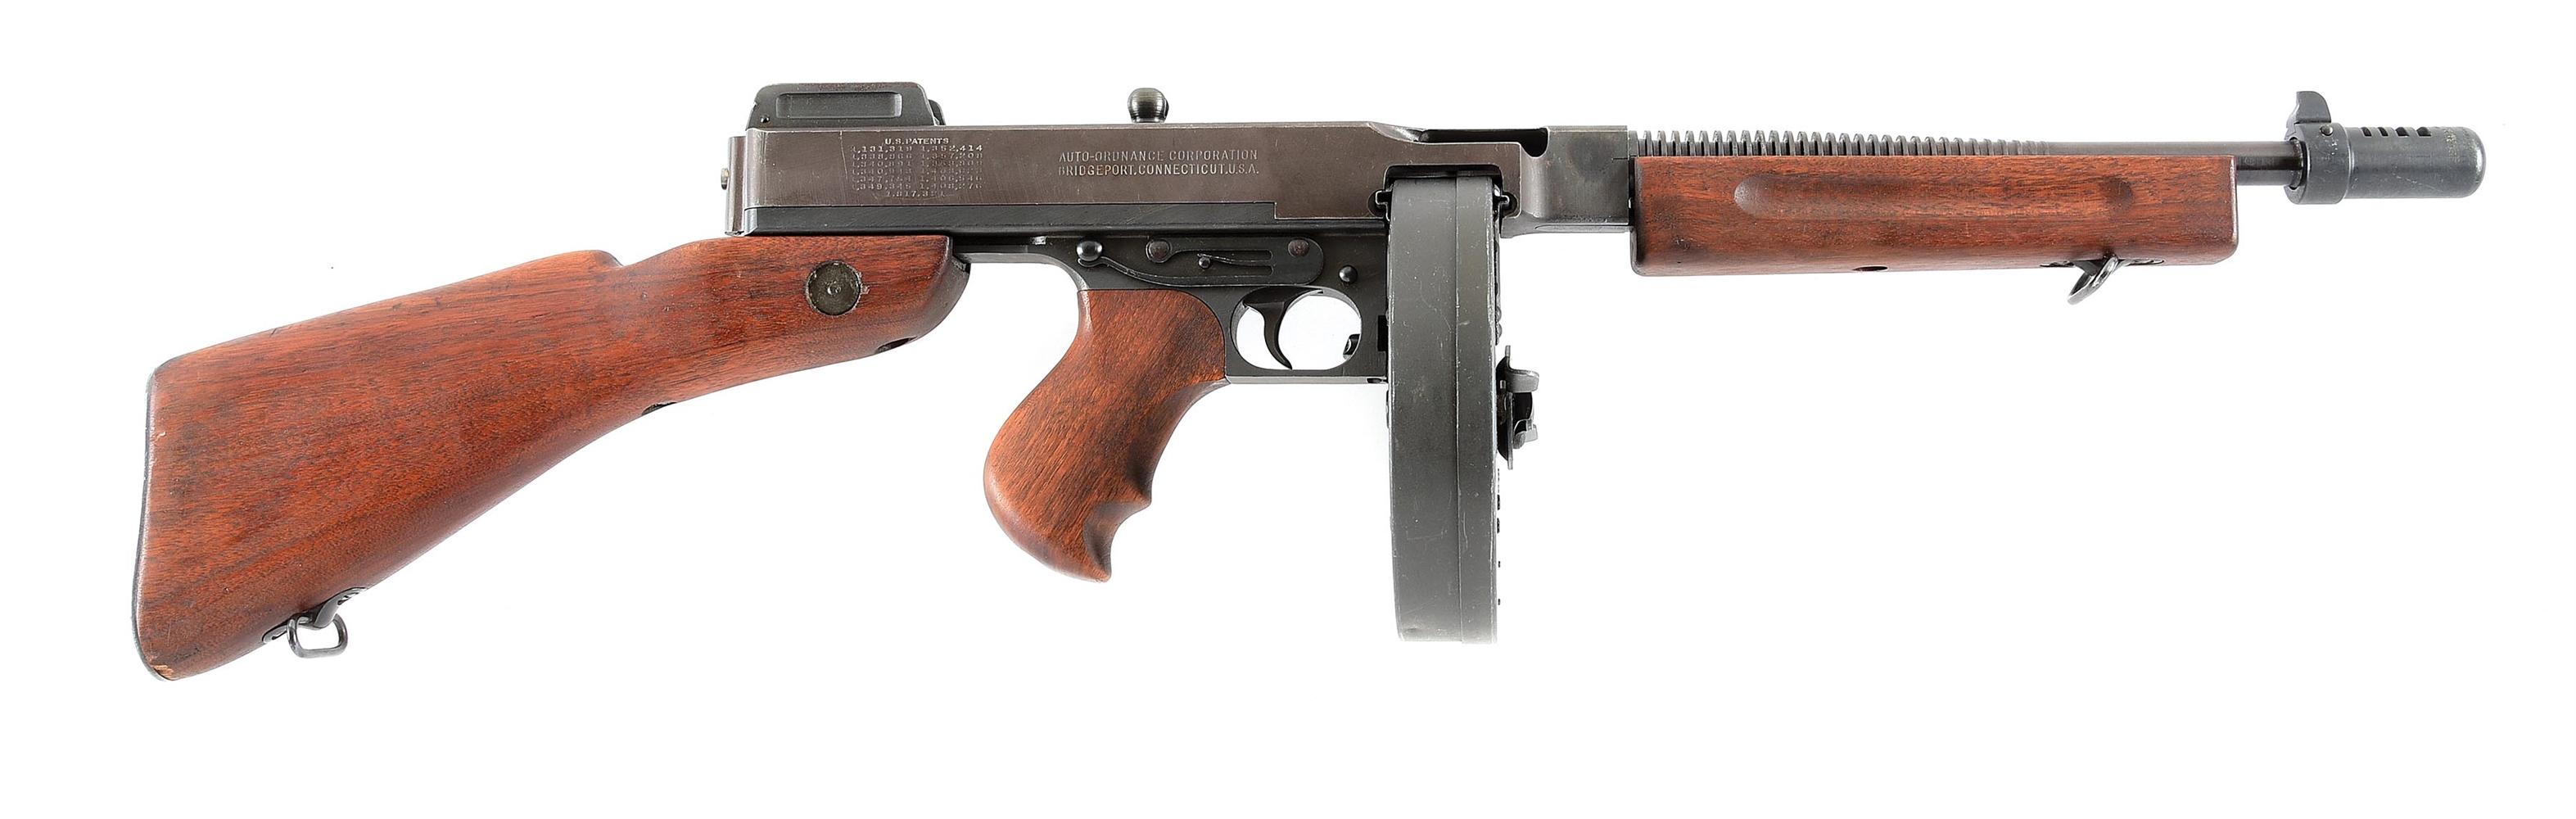 (N) SAVAGE MANUFACTURED AUTO ORDNANCE 1928A1 THOMPSON MACHINE WITH MILITARY “FLAMING BOMB” PROOF (CURIO AND RELIC).